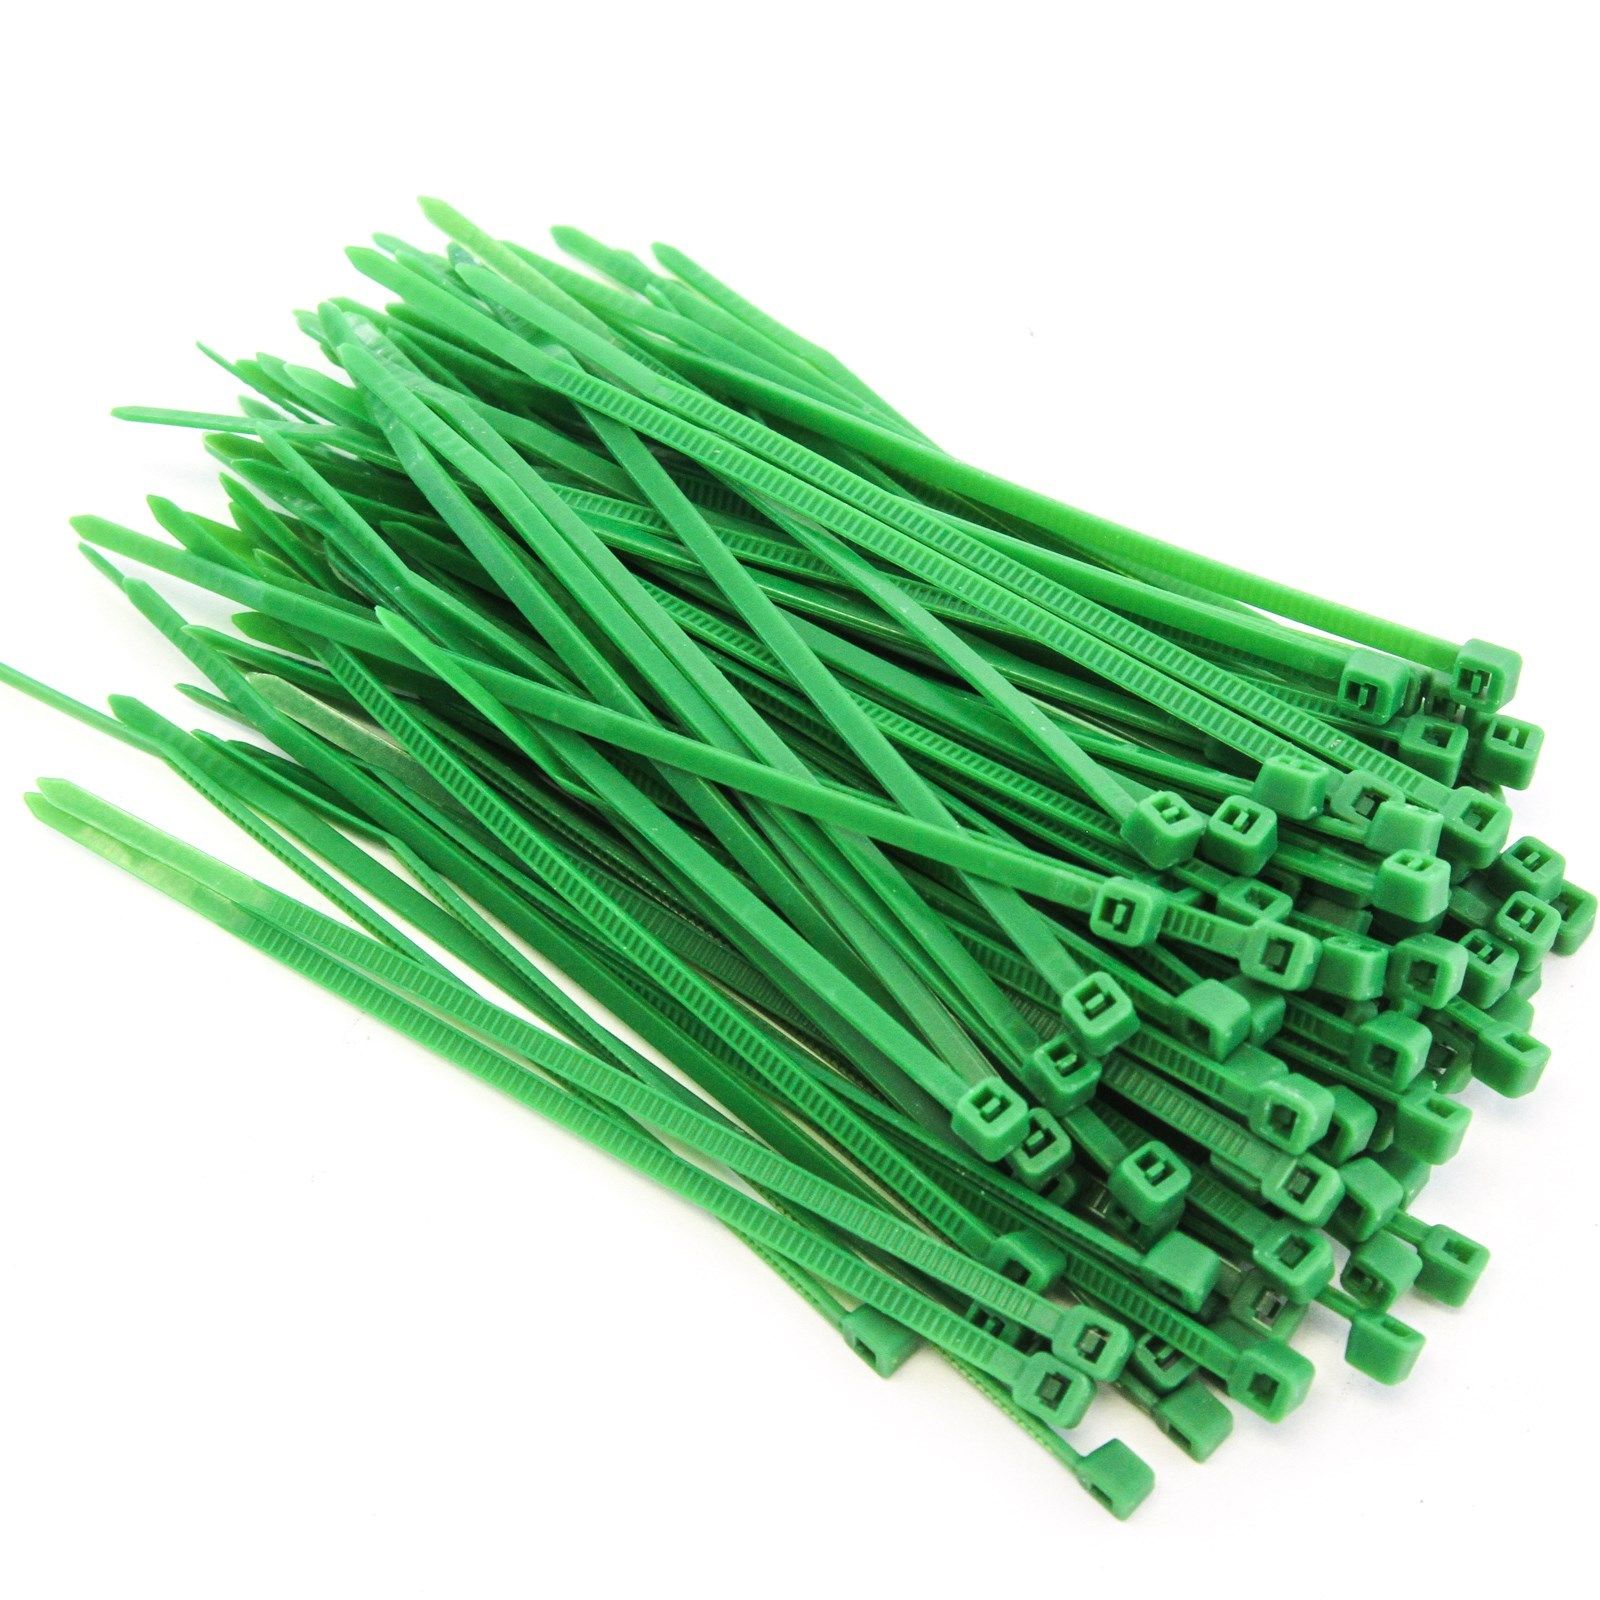 100 Heavy Duty 4 Inches 18 Pound Zip Cable Ties Nylon Wrap Green